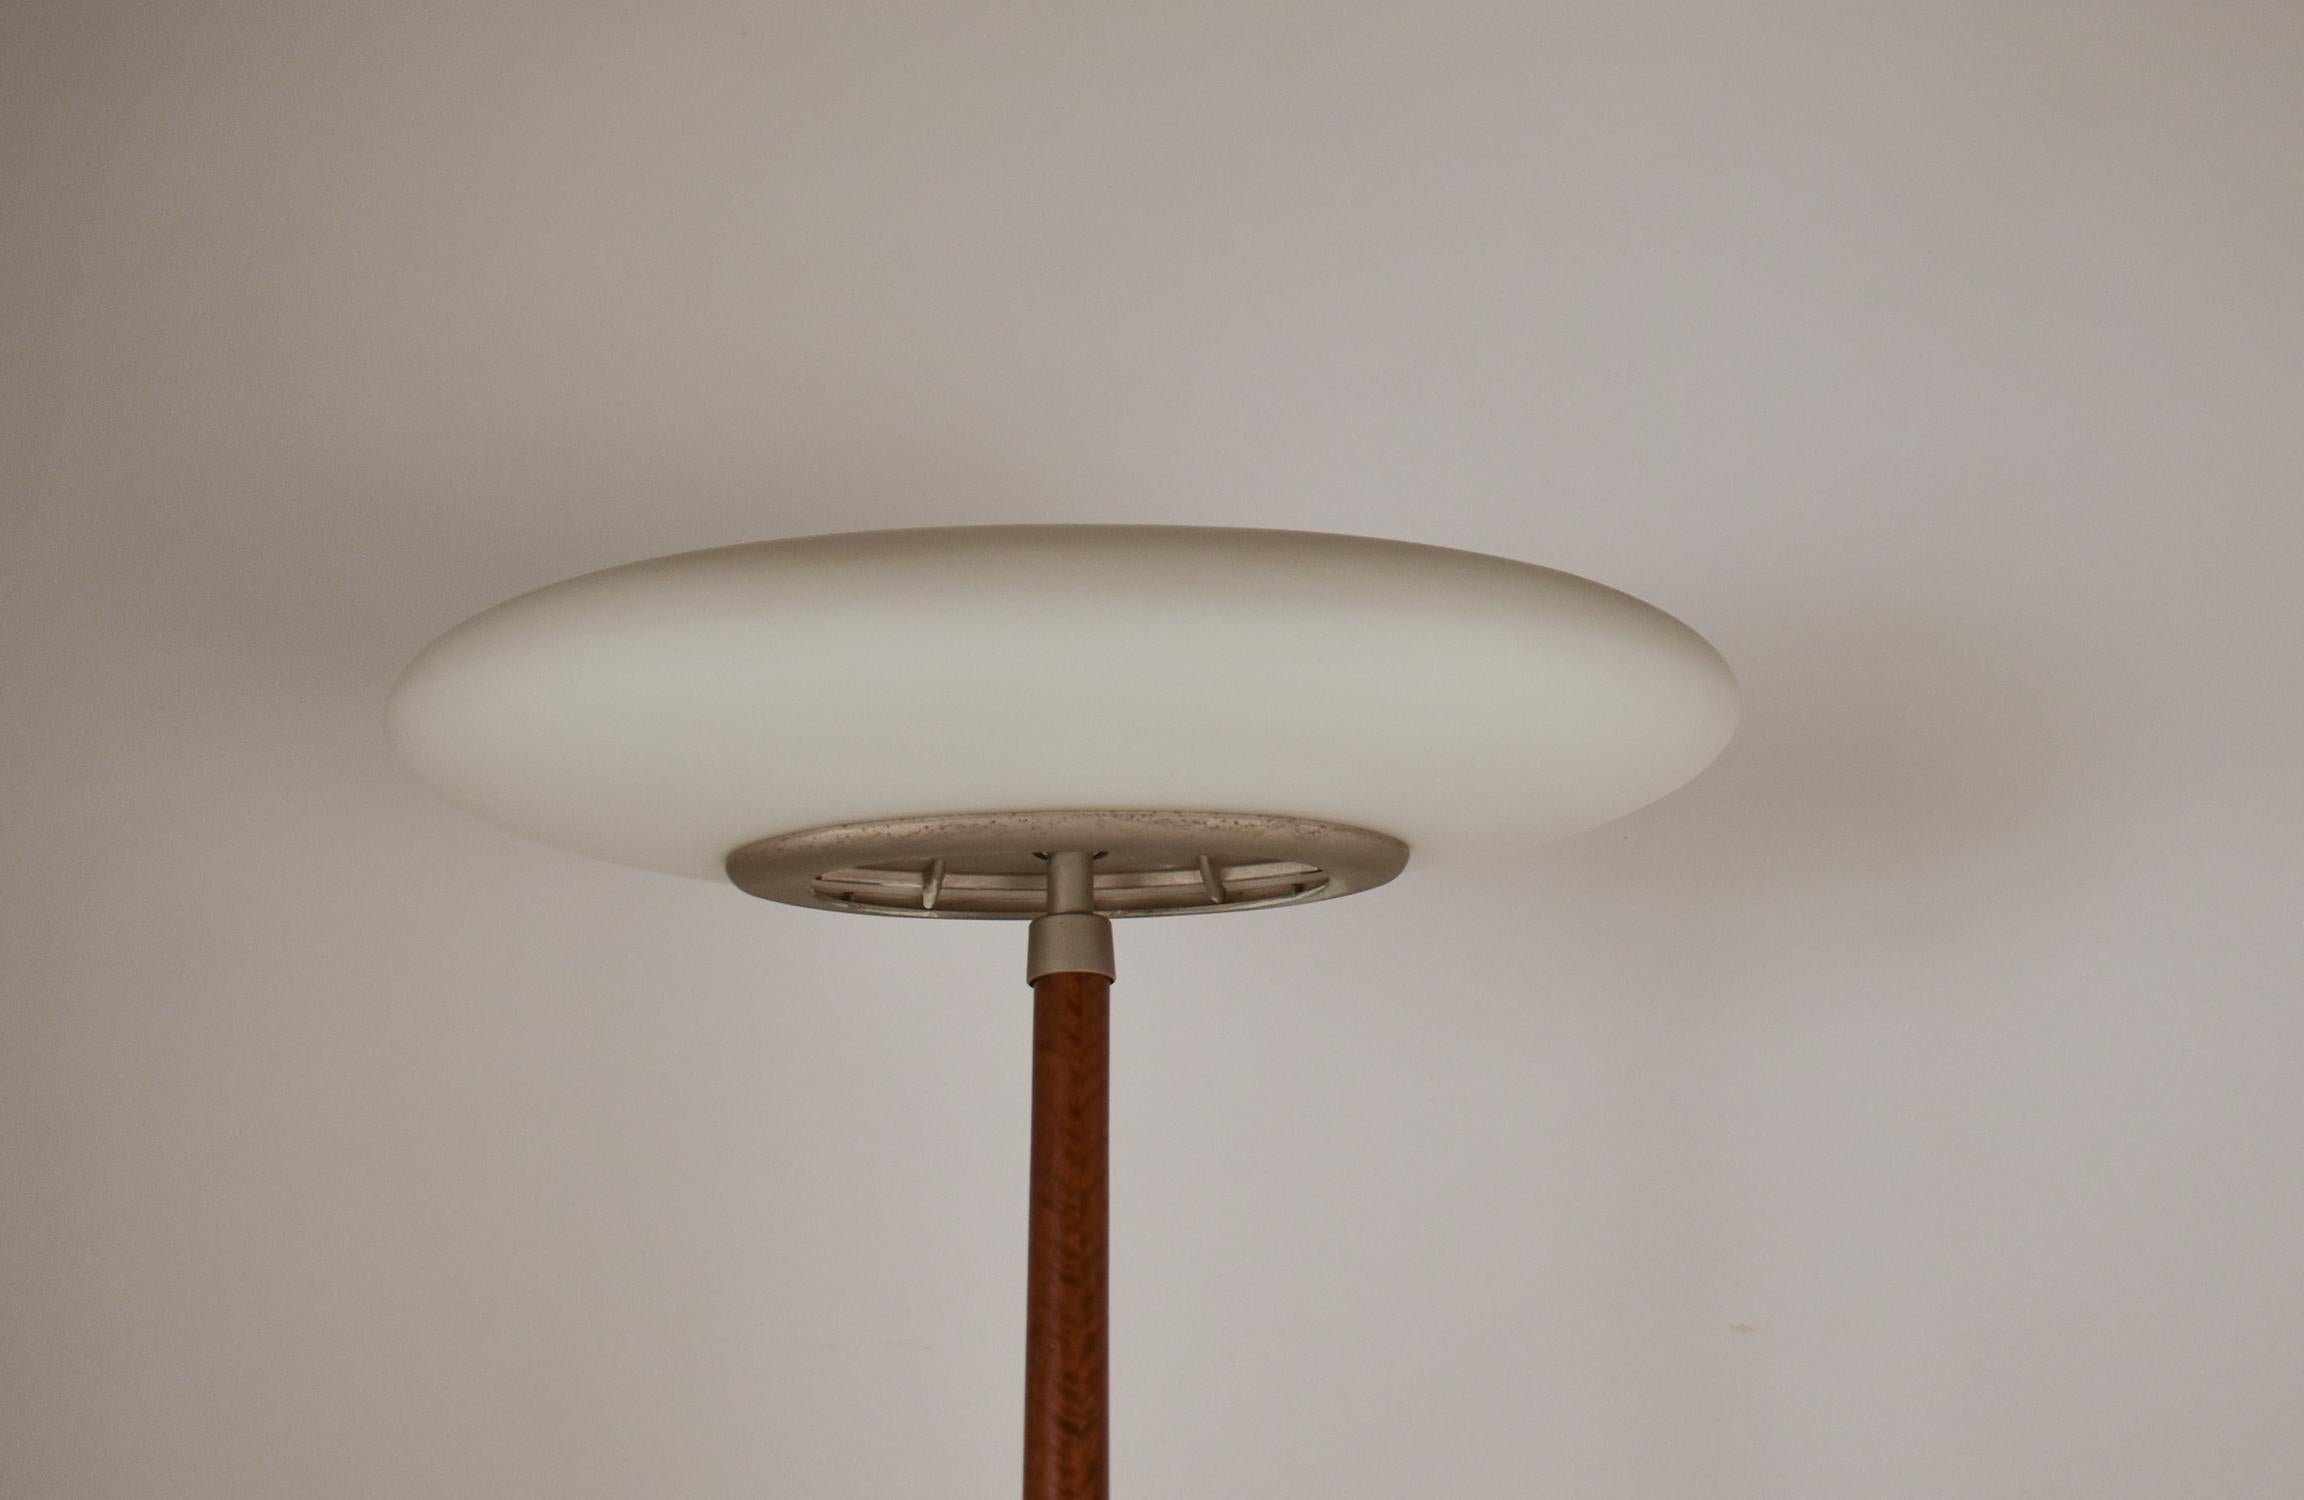 PAO Floor Lamp by Matteo Thun for Arteluce, Italy 1990's In Good Condition For Sale In Barcelona, Cataluna